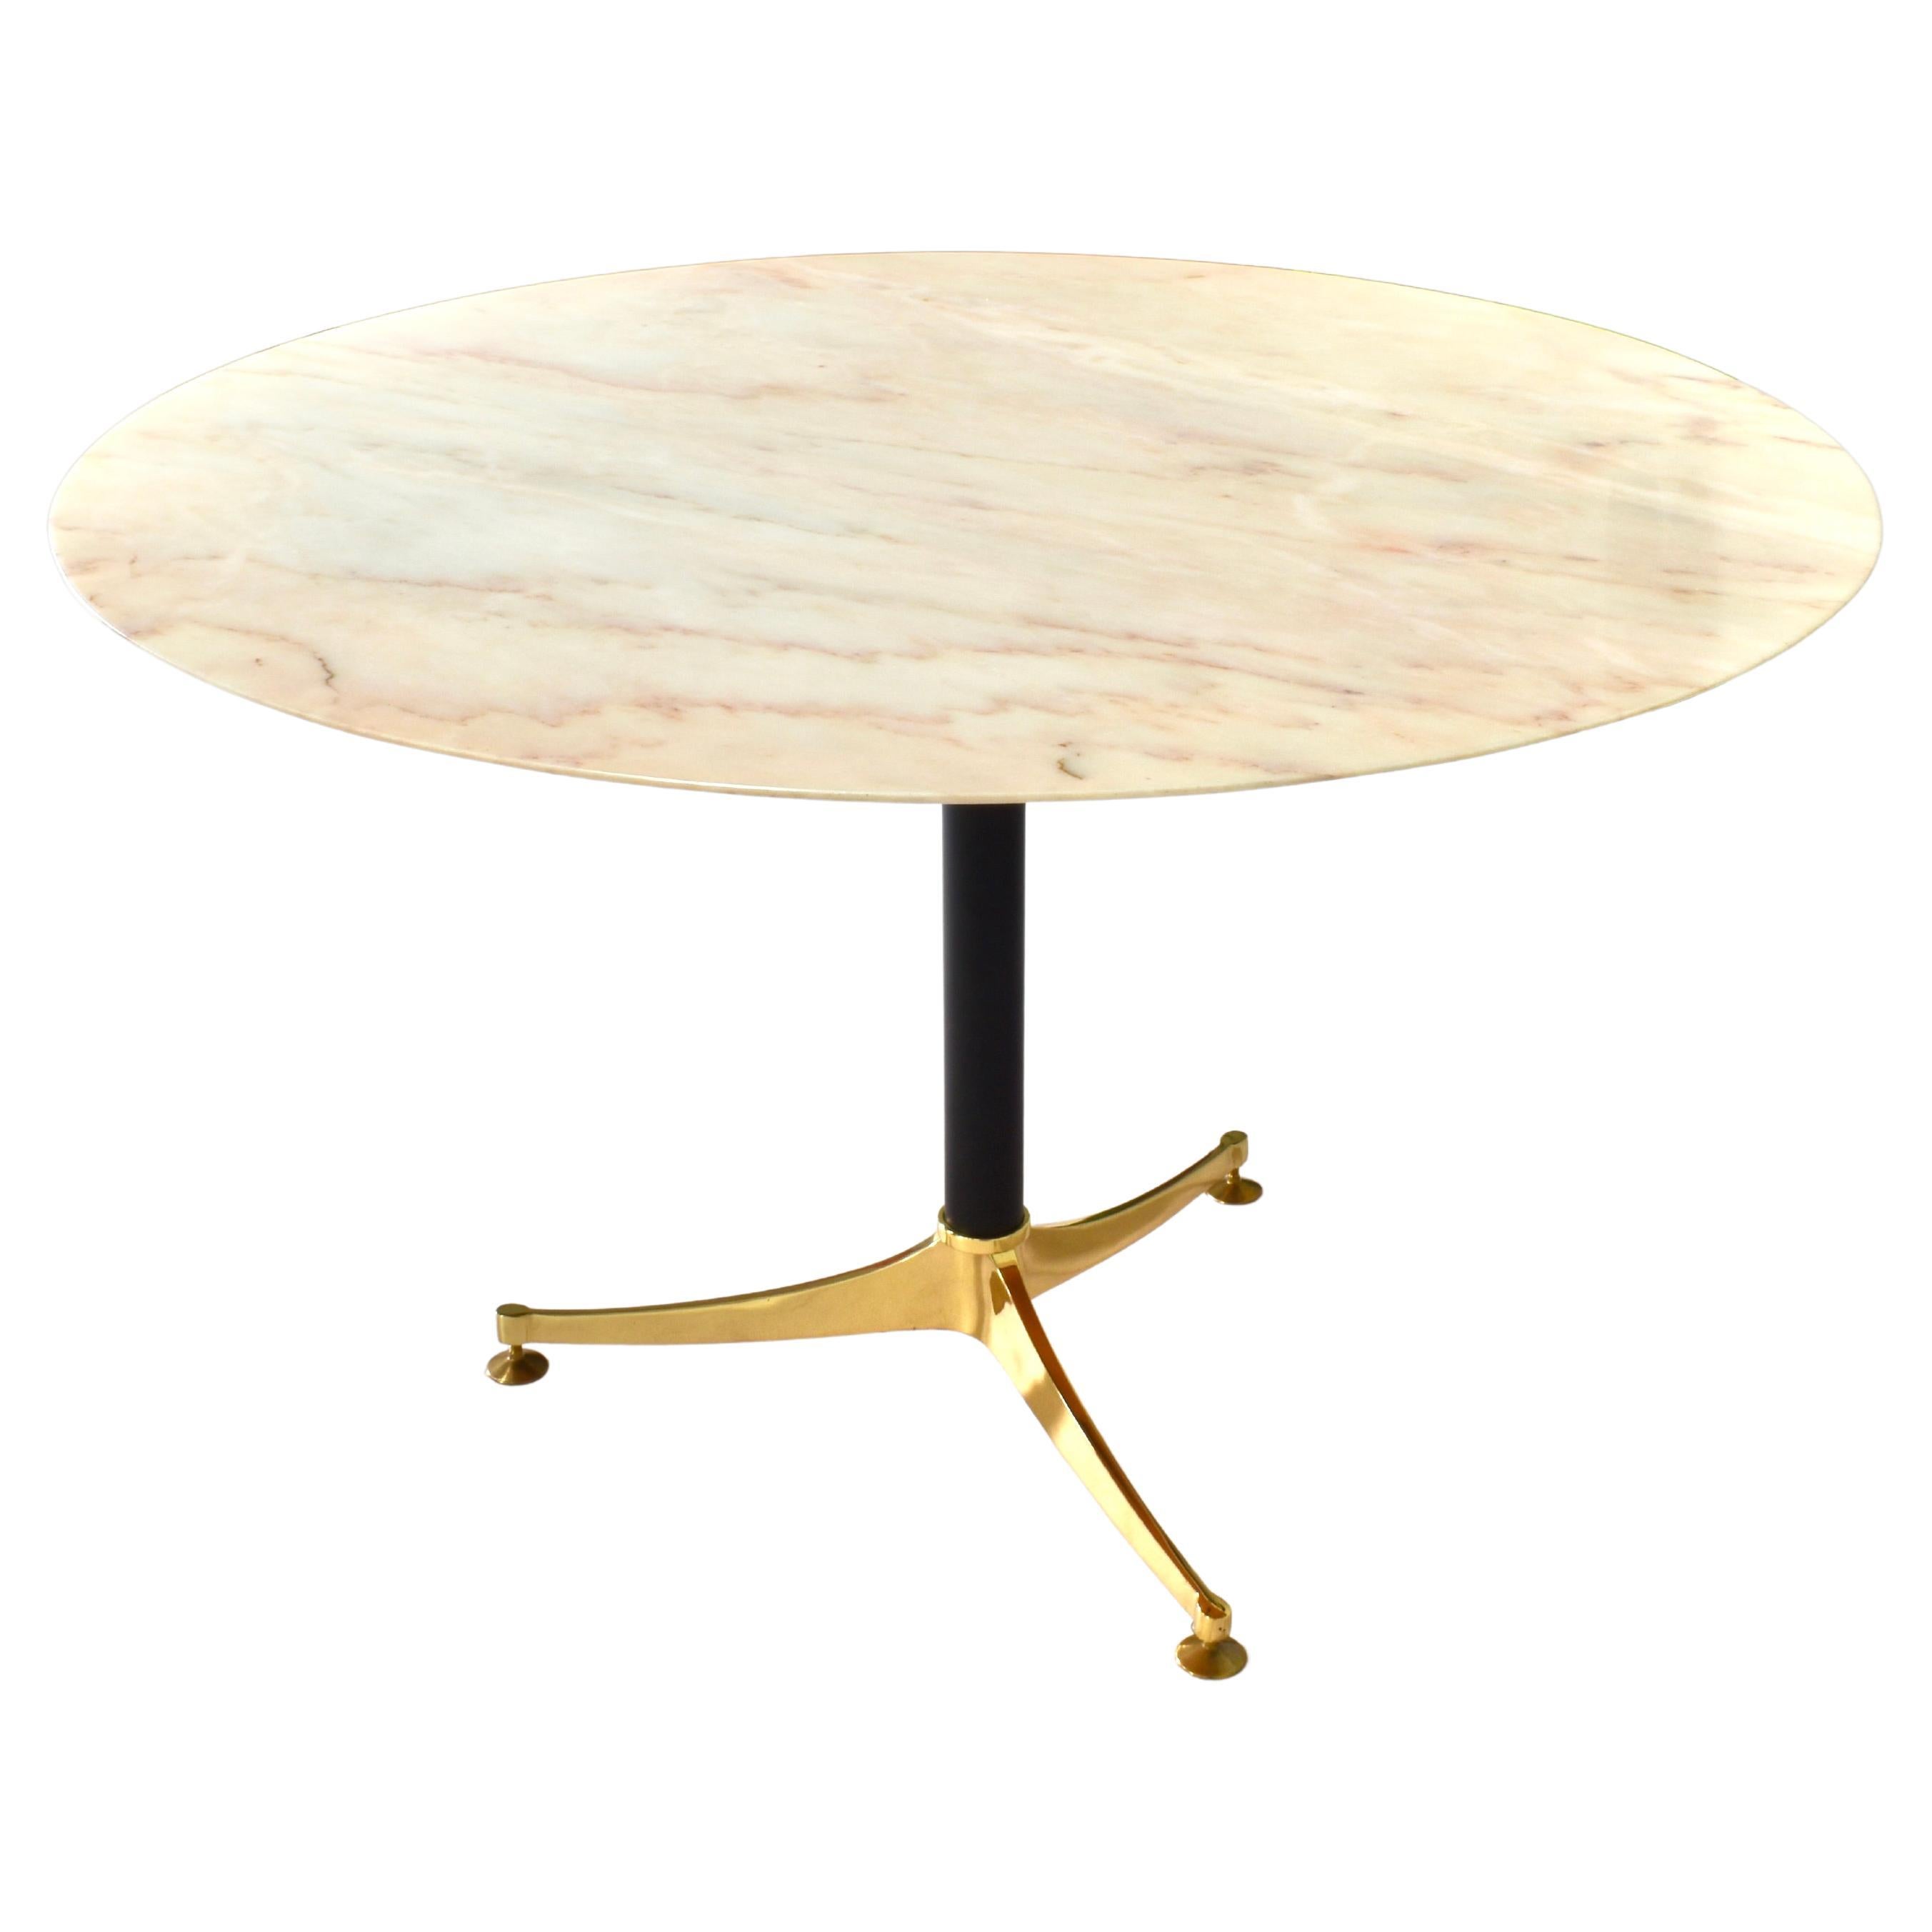 1970's Italian Dining Table in Rosé Marble and Brass - Italy, circa 1970 For Sale